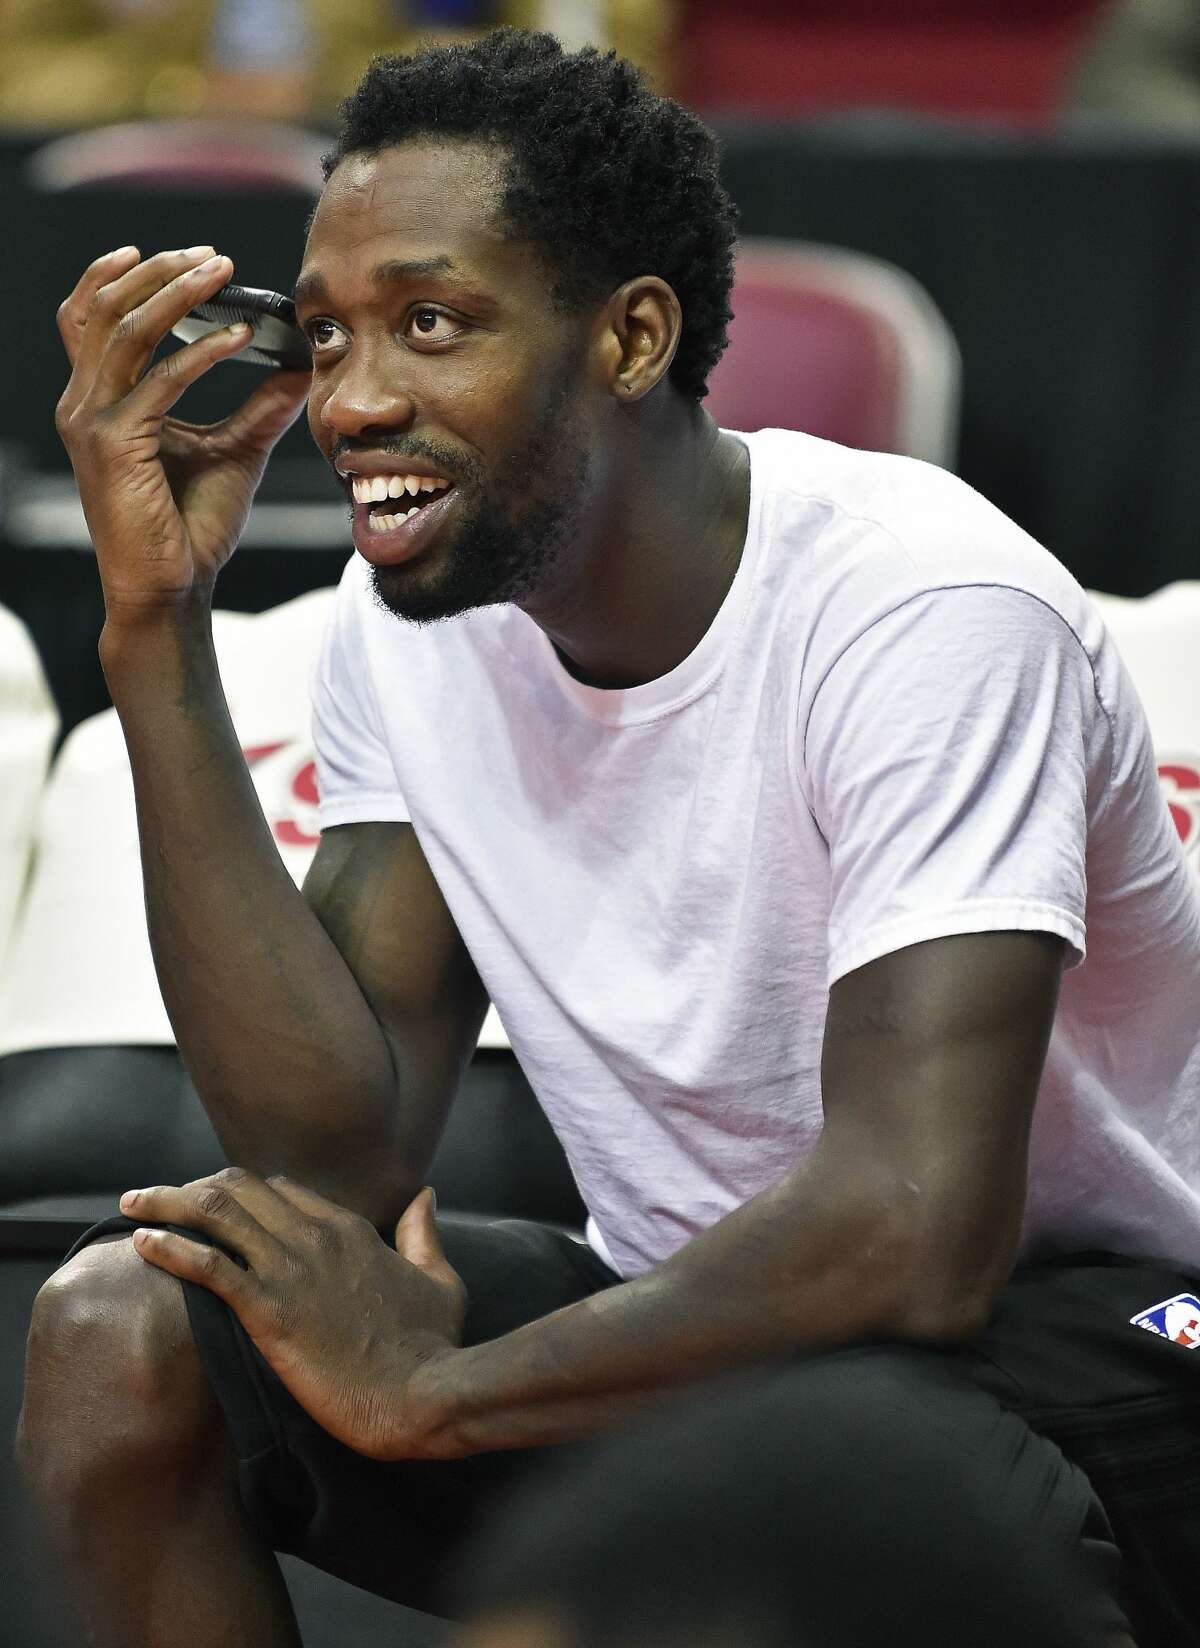 Houston Rockets' Patrick Beverley watches from the sidelines during the first half of an NCAA college basketball game between Texas Southern and Grambling in the championship of the Southwestern Athletic Conference, Saturday, March 11, 2017, in Houston. (AP Photo/Eric Christian Smith)